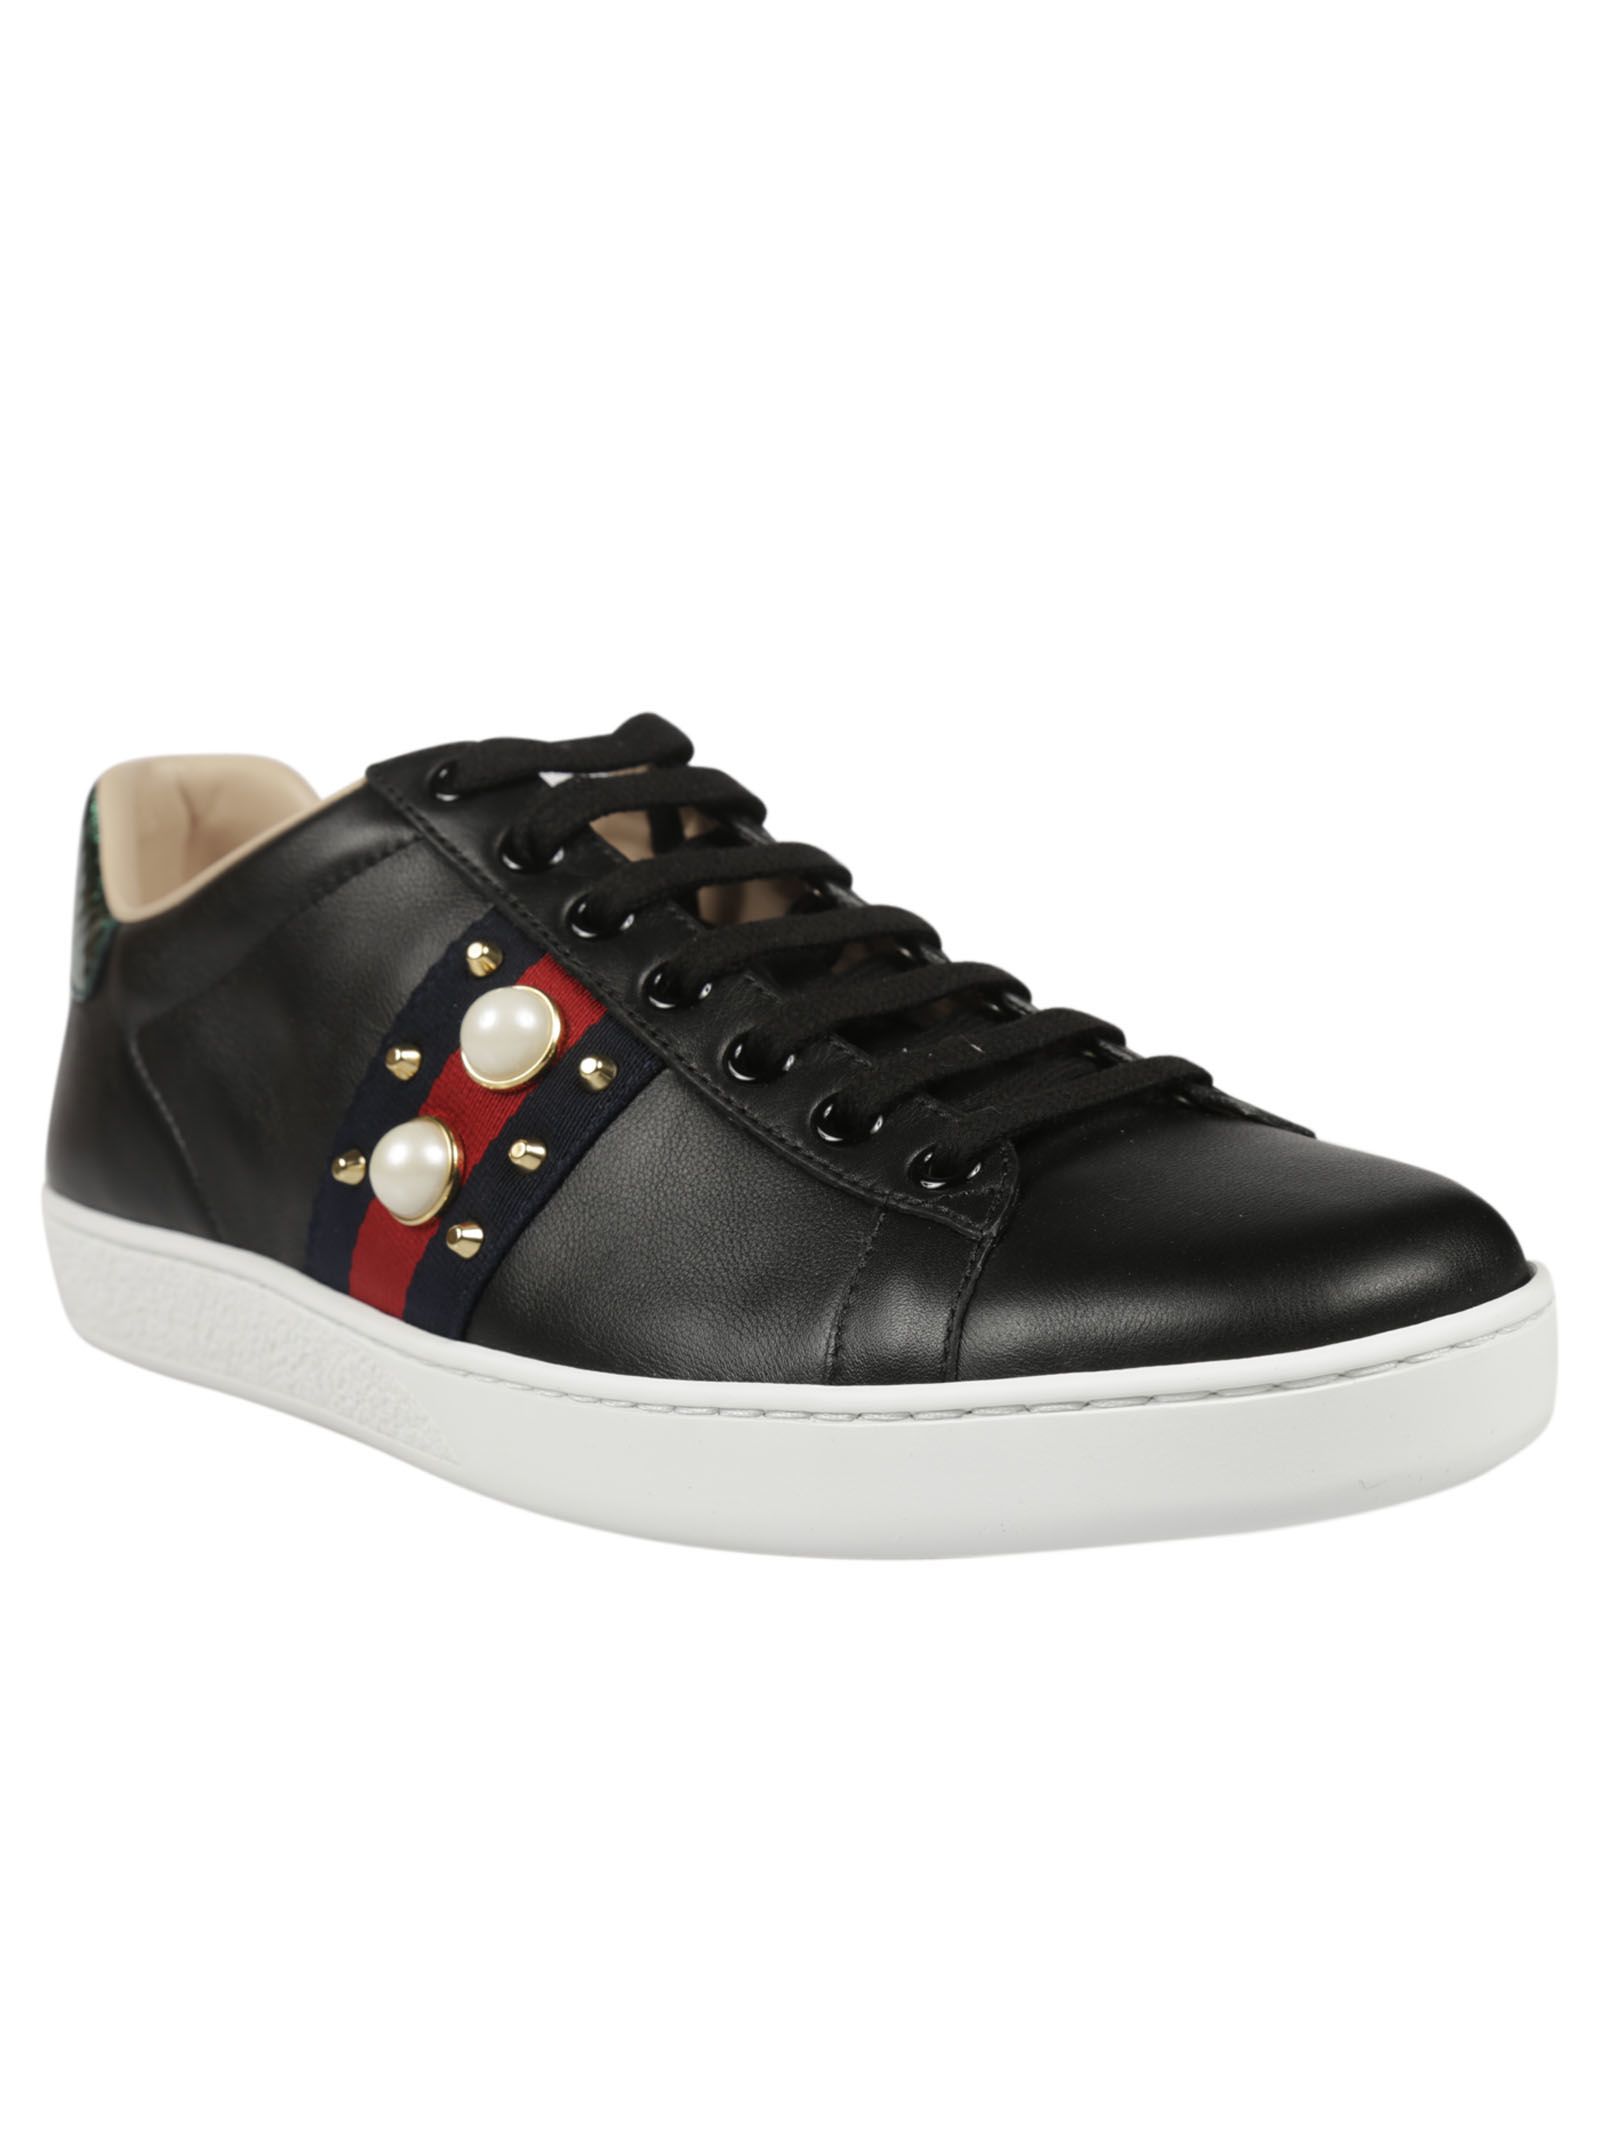 Gucci Gucci Ace Studded Low-top Sneakers - Black - 3125663 | italist